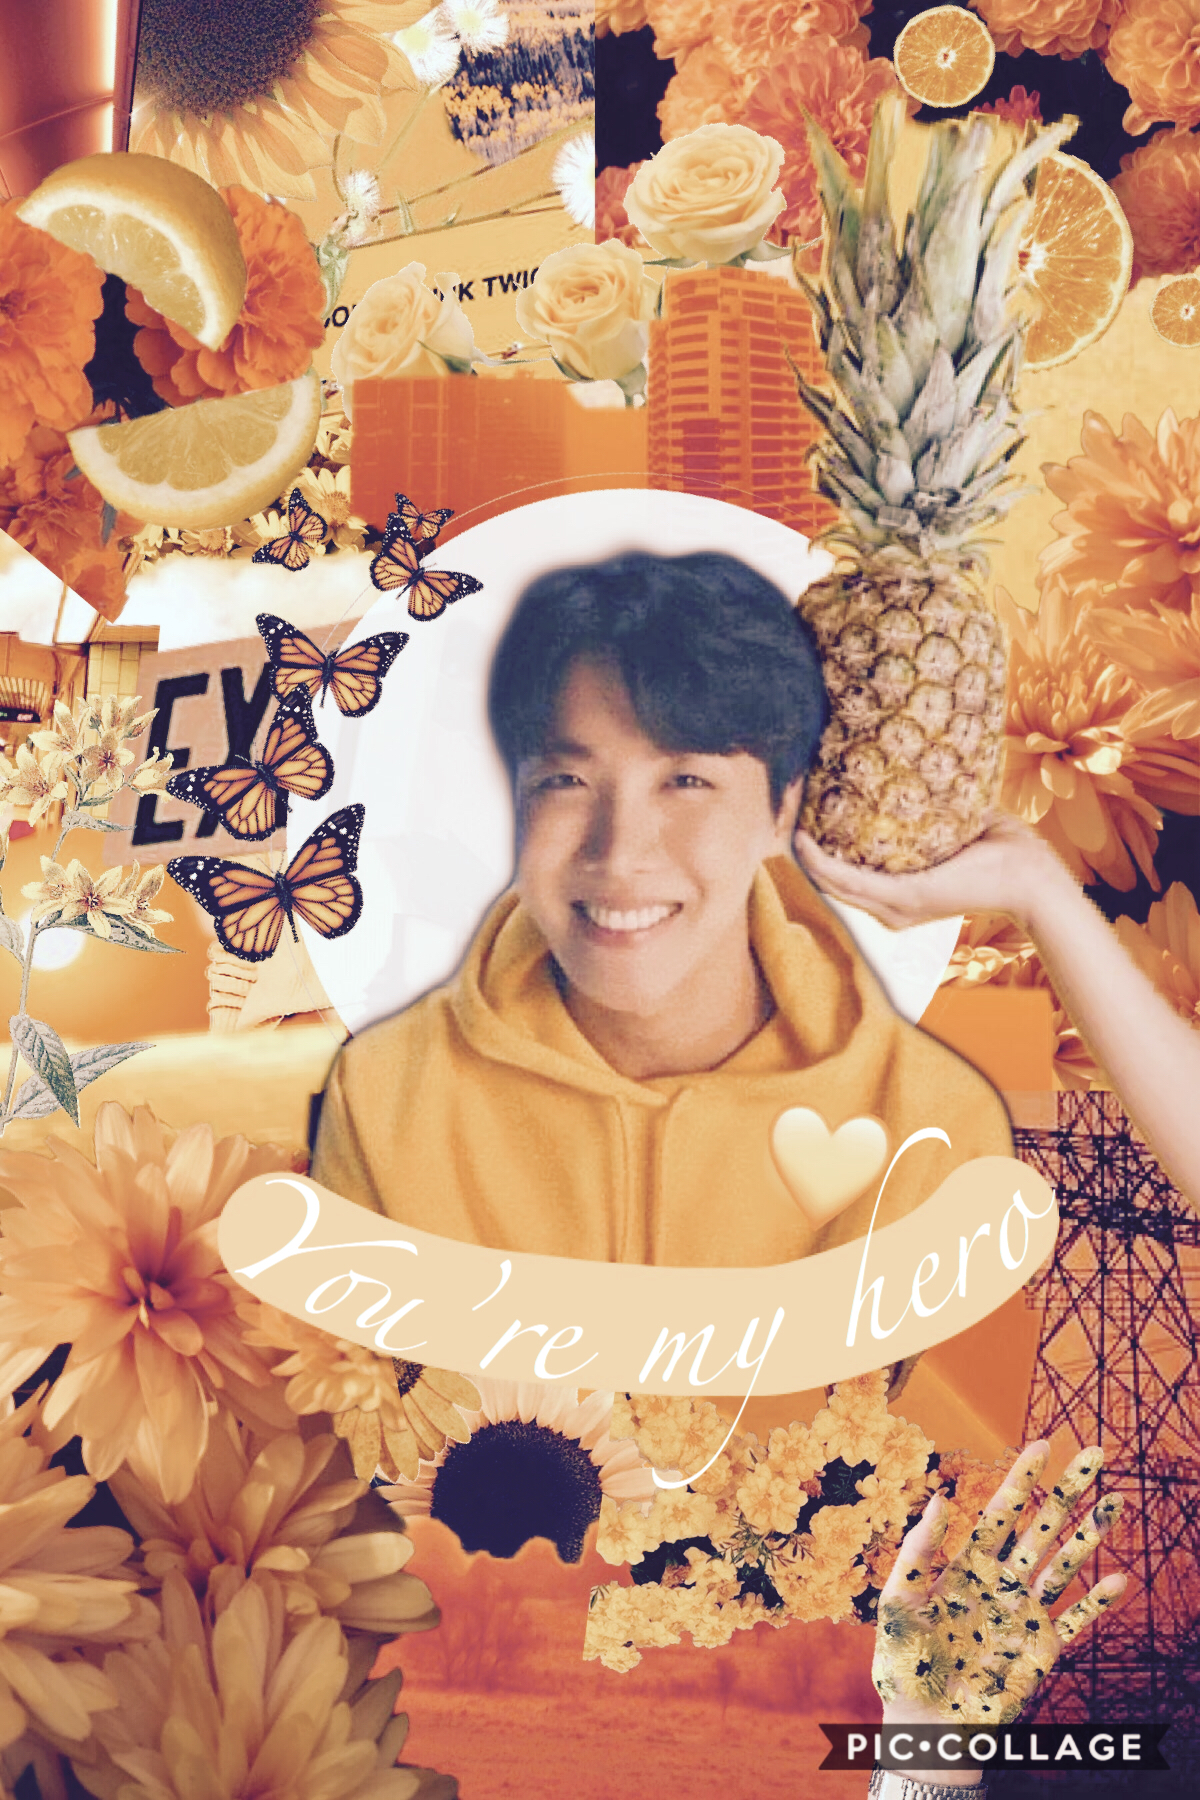 💛 HAPPY JHOPE DAY💛

Happy Birthday our Sunshine I hope you never stop smiling and bringing joy to this world 🥰

—> I’m your hero! <—
—> you’re my hero! <—